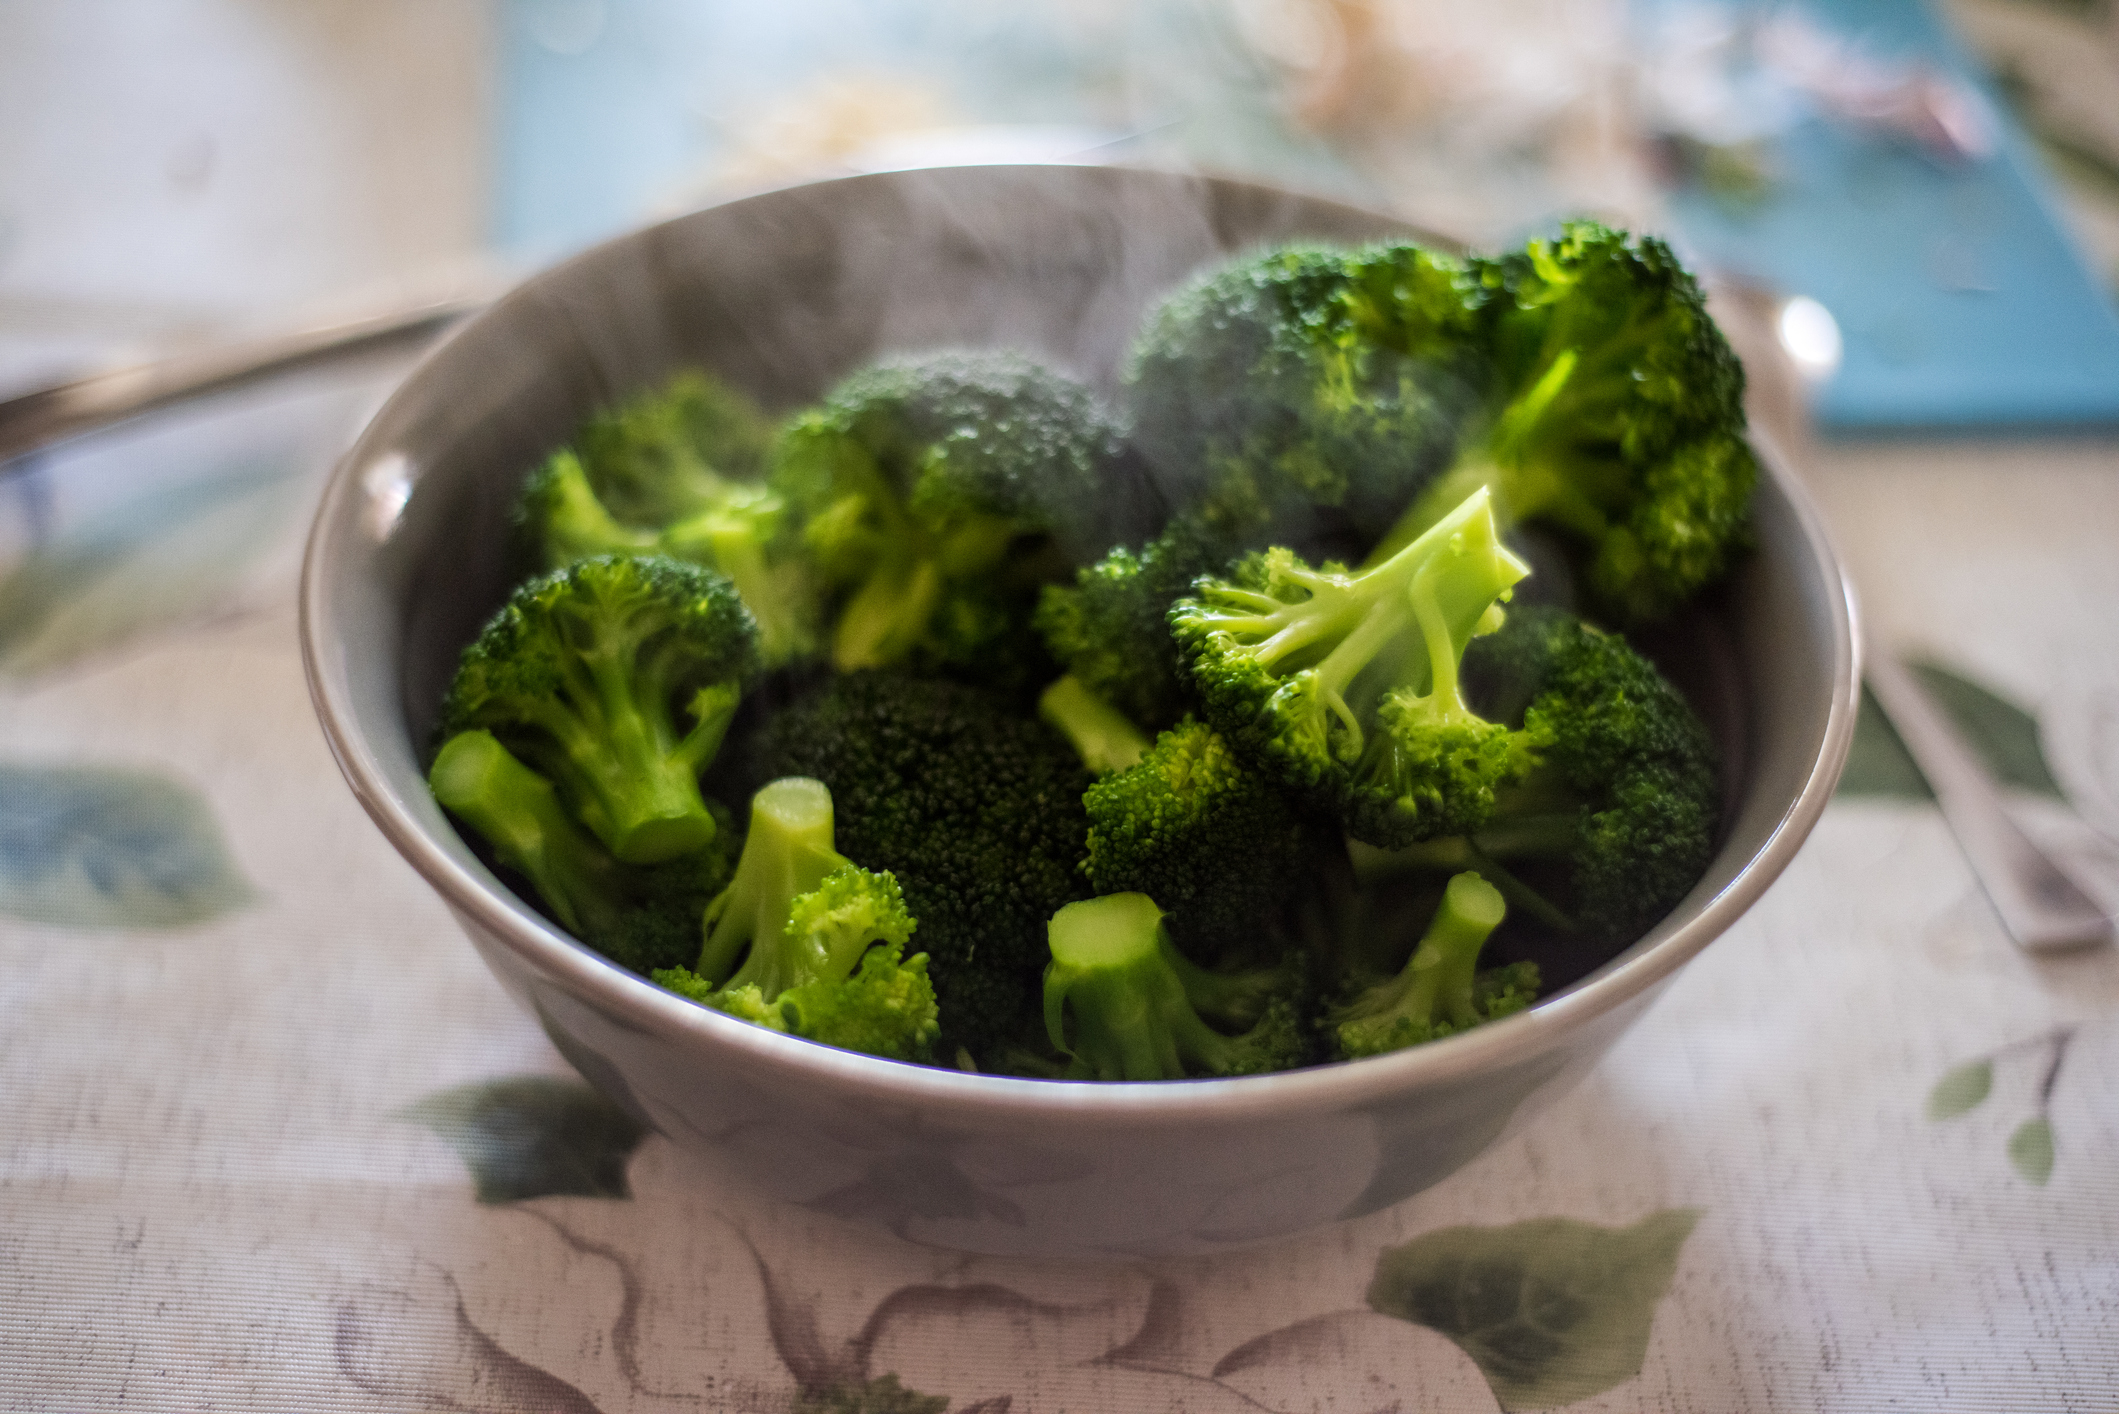 A bowl of hot, steamed broccoli on a table